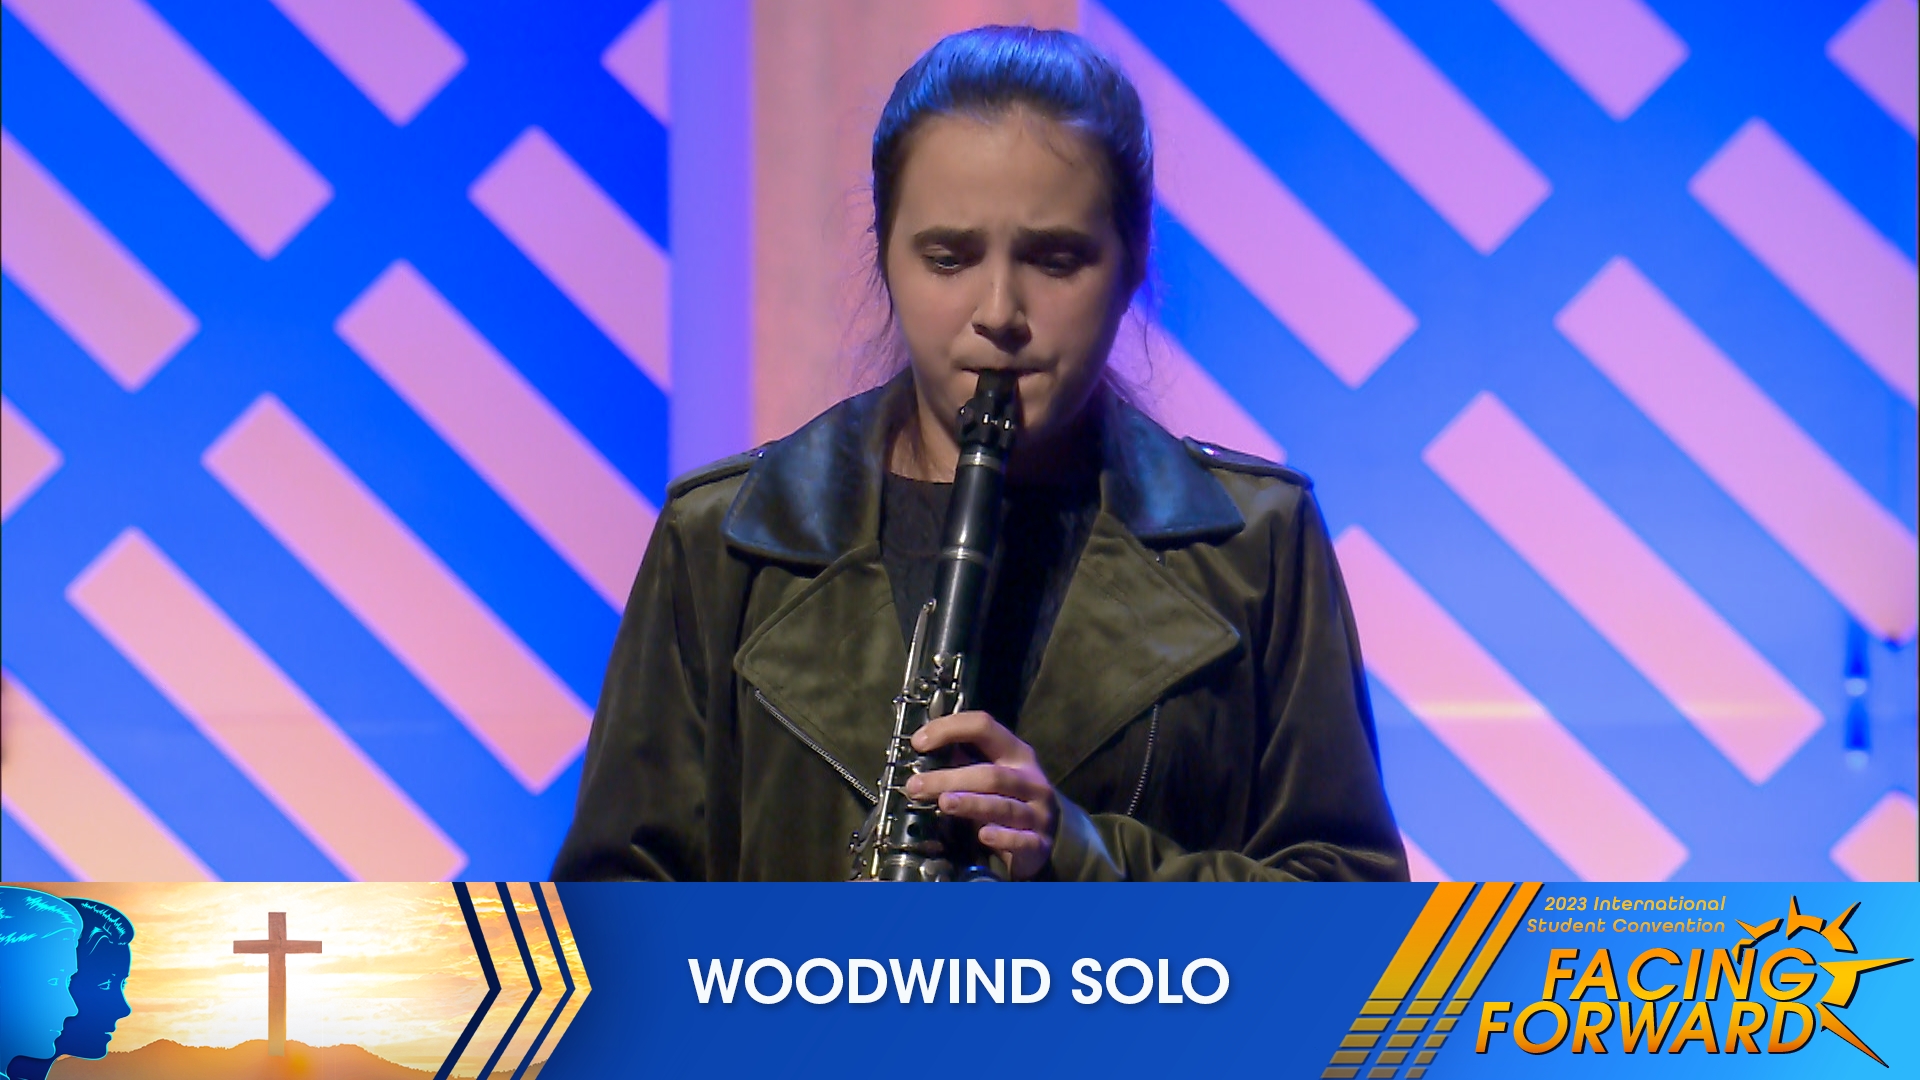 Woodwind Solo, "Christians, We Have Met to Worship" - ISC 2023